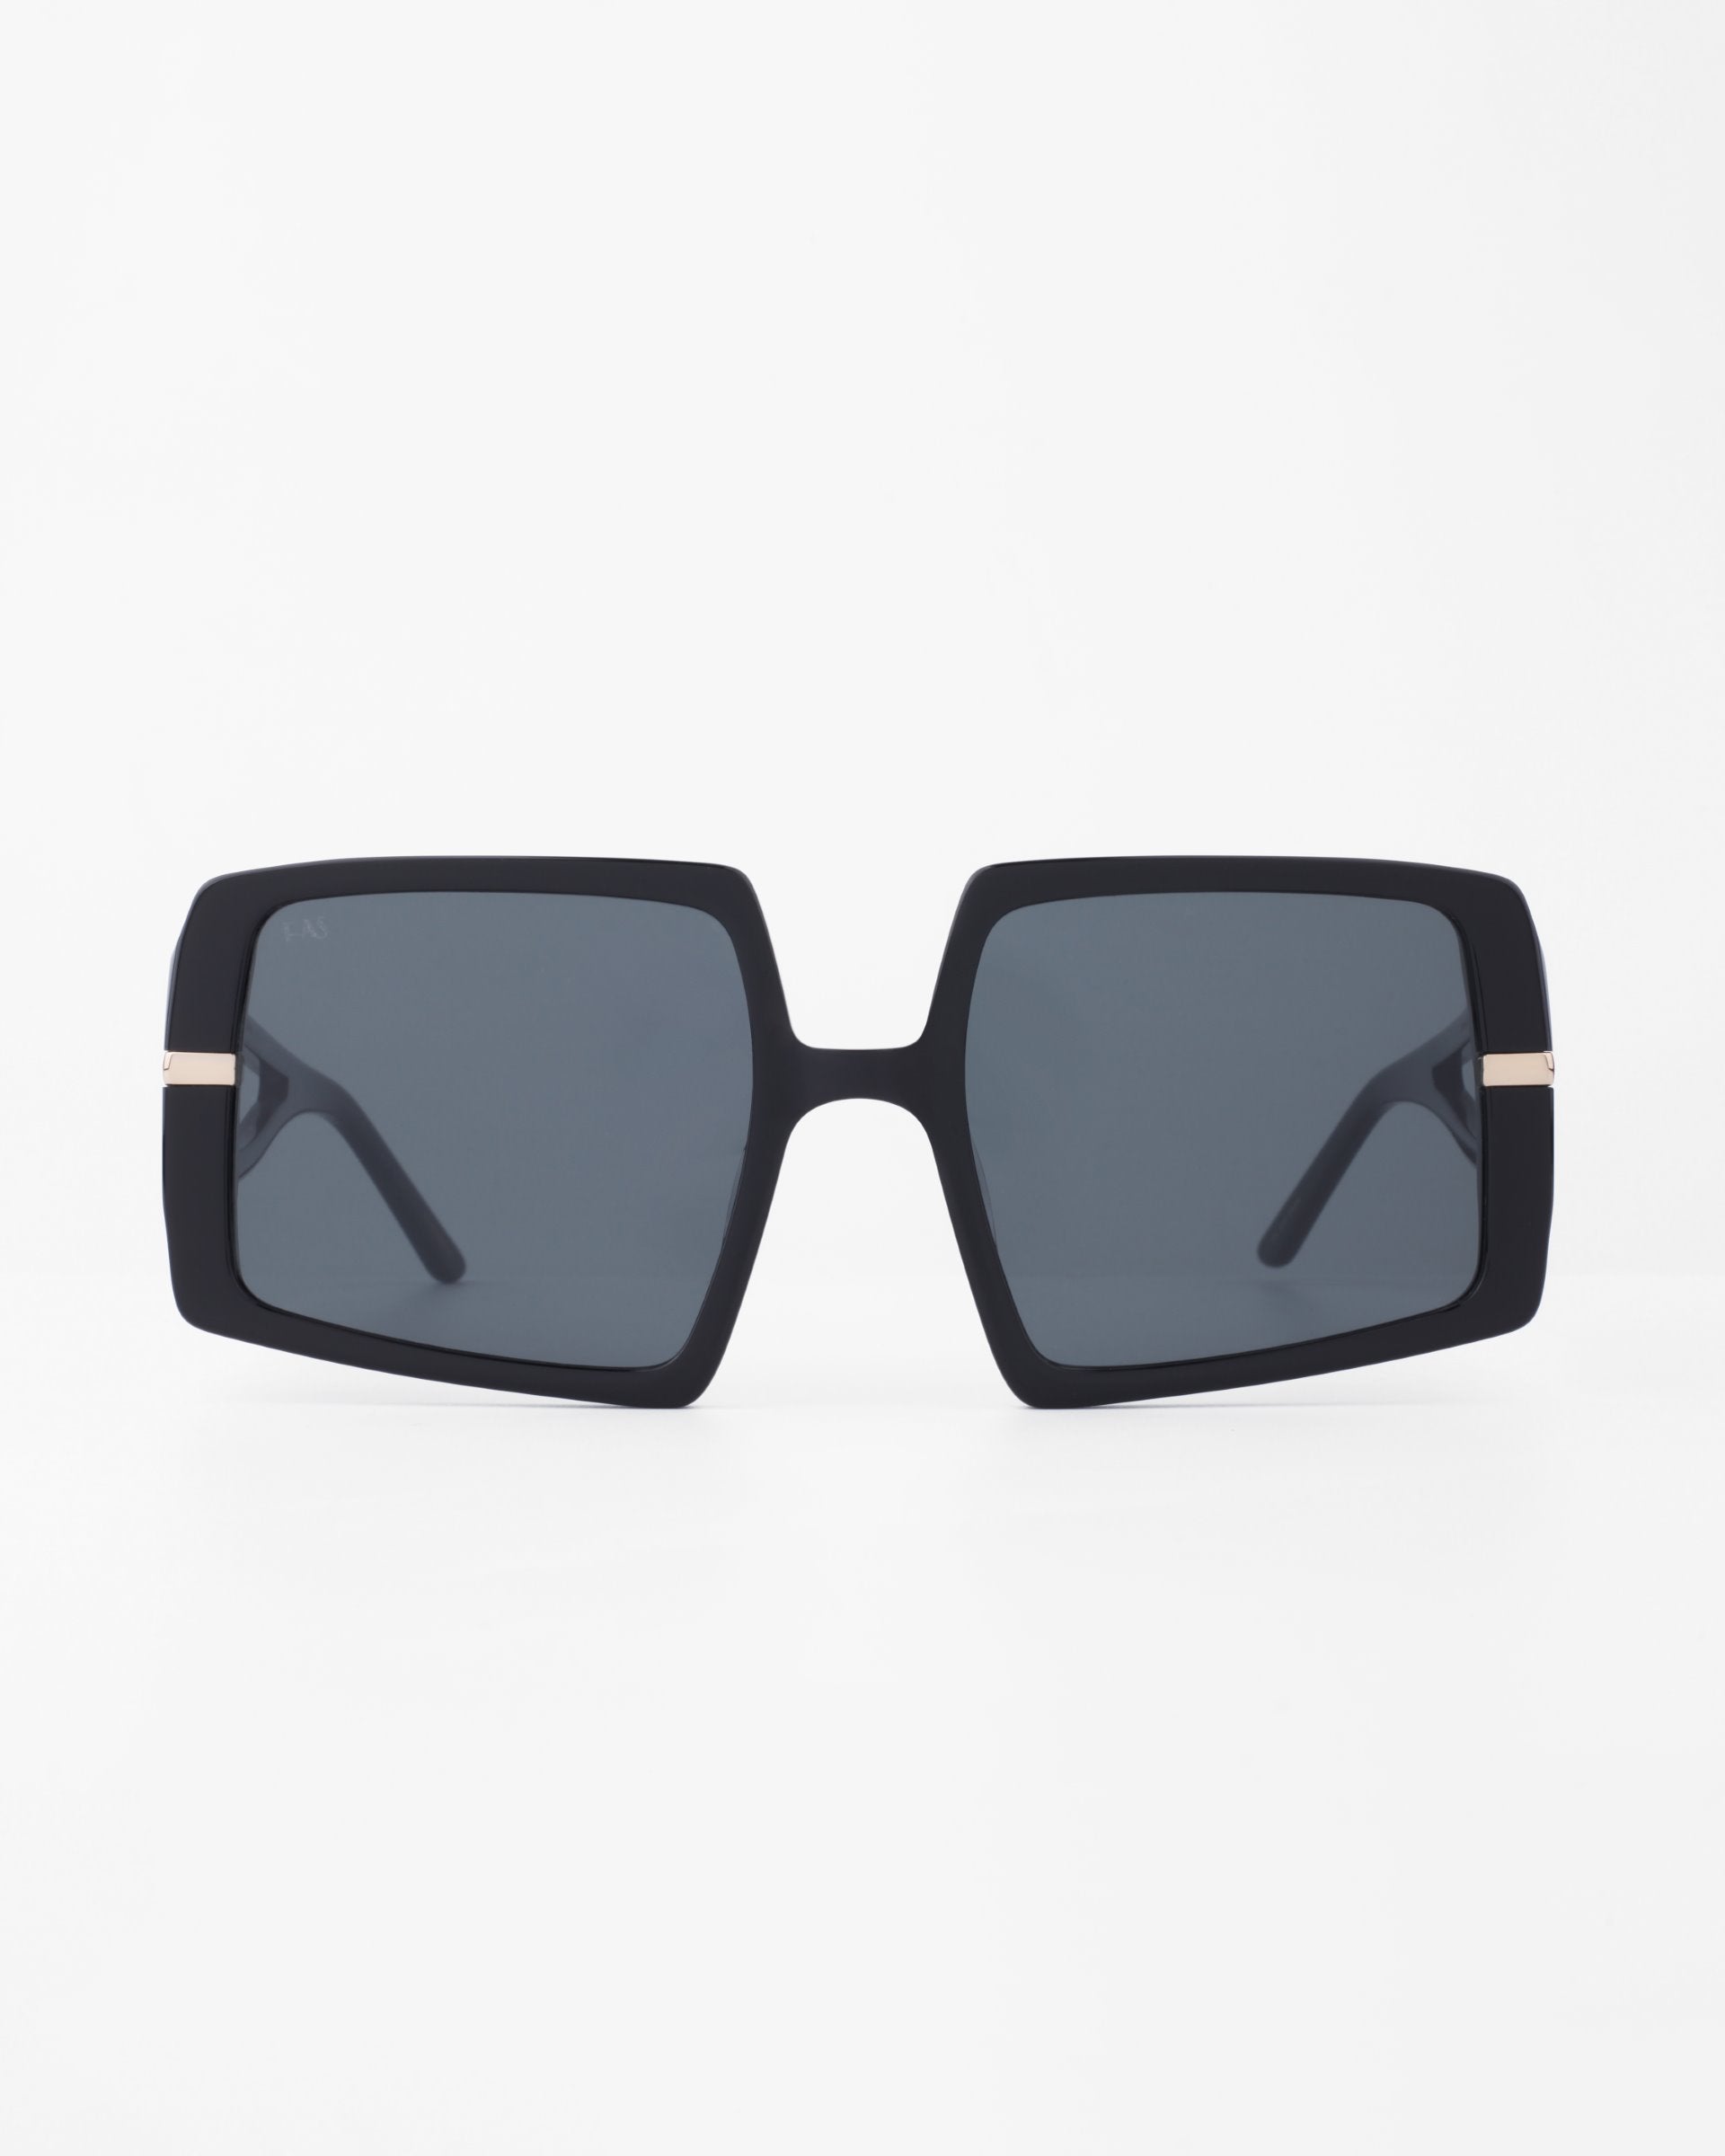 A pair of oversized, black-framed sunglasses with square, shatter-resistant nylon lenses. The darkly tinted lenses are complemented by a plant-based acetate frame featuring a small, 18-karat gold-plated accent on the temples near the hinges. The background is plain white. This is the Saturday by For Art's Sake®.